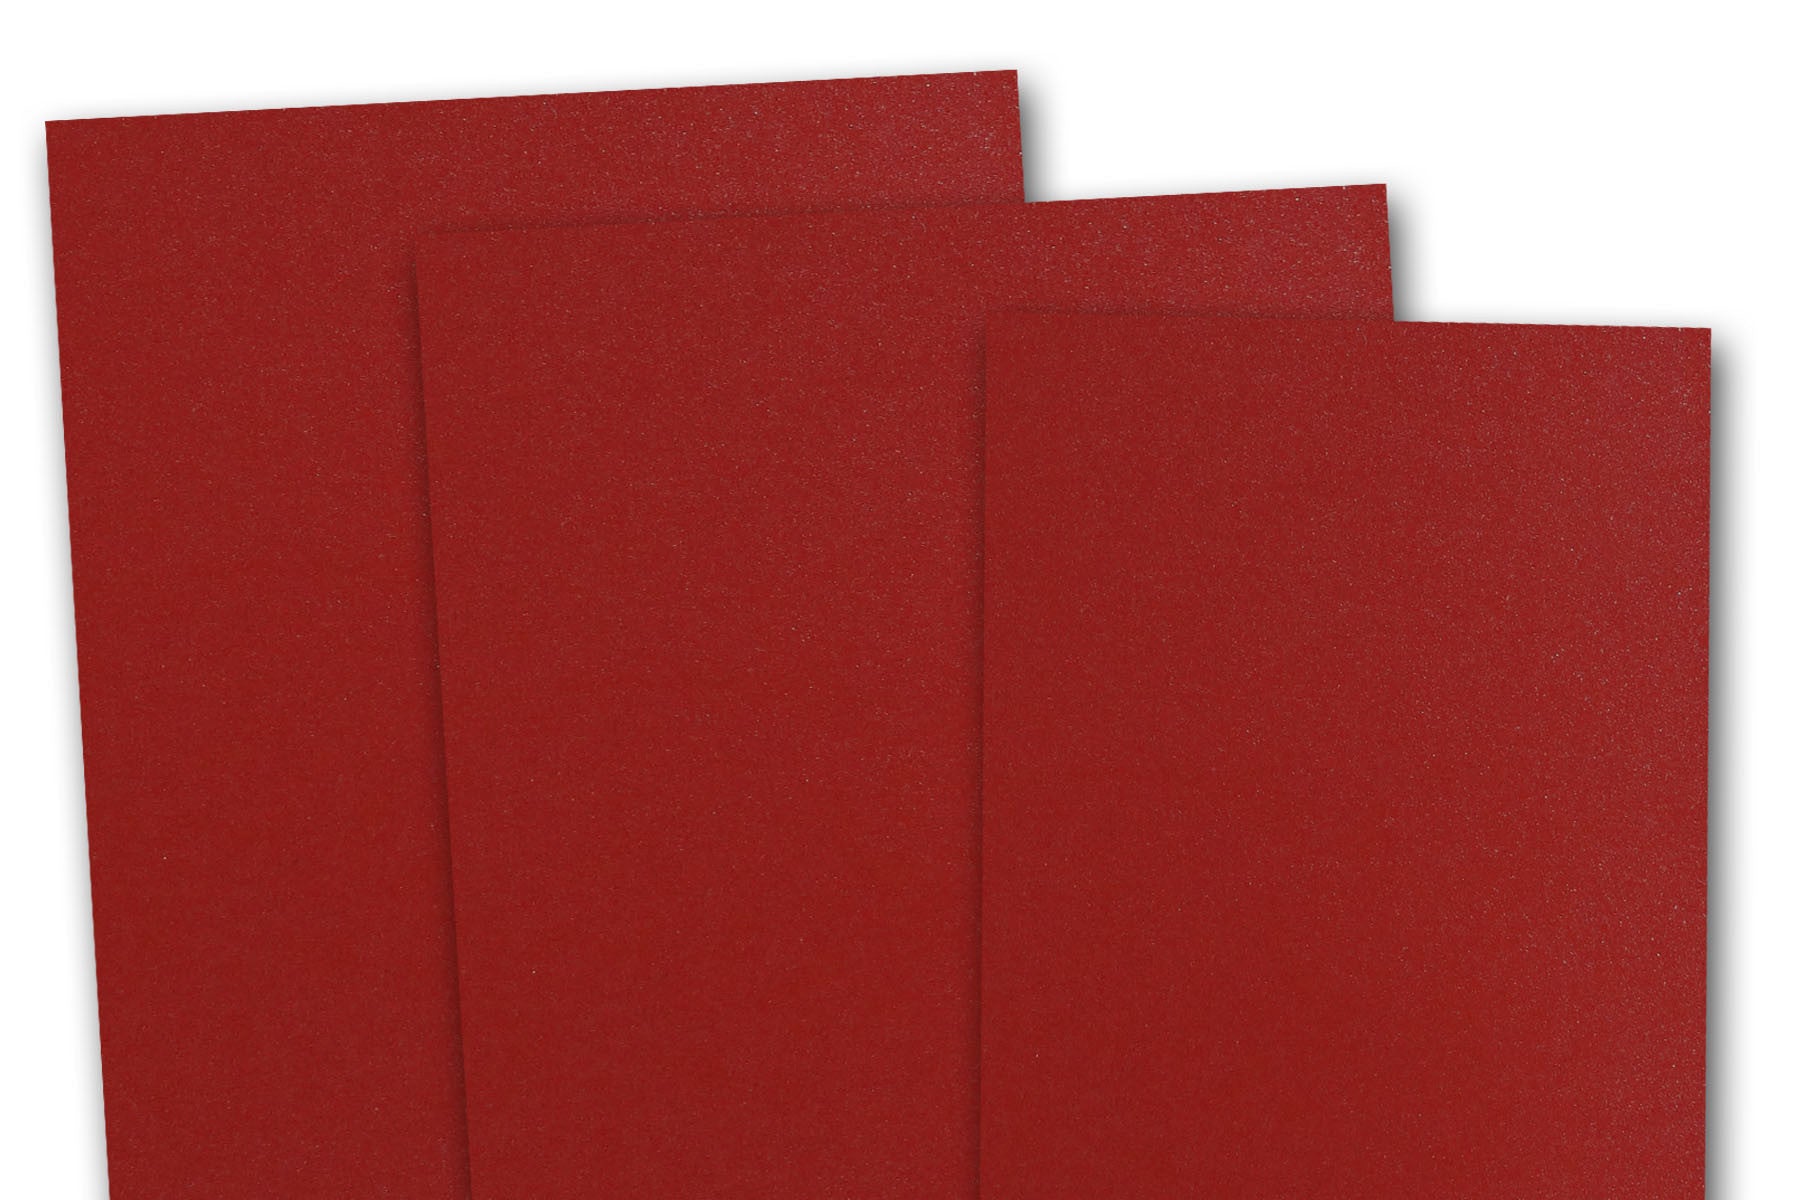 Shine RED SATIN - Shimmer Metallic Card Stock Paper - 8.5 x 11 - 92lb Cover